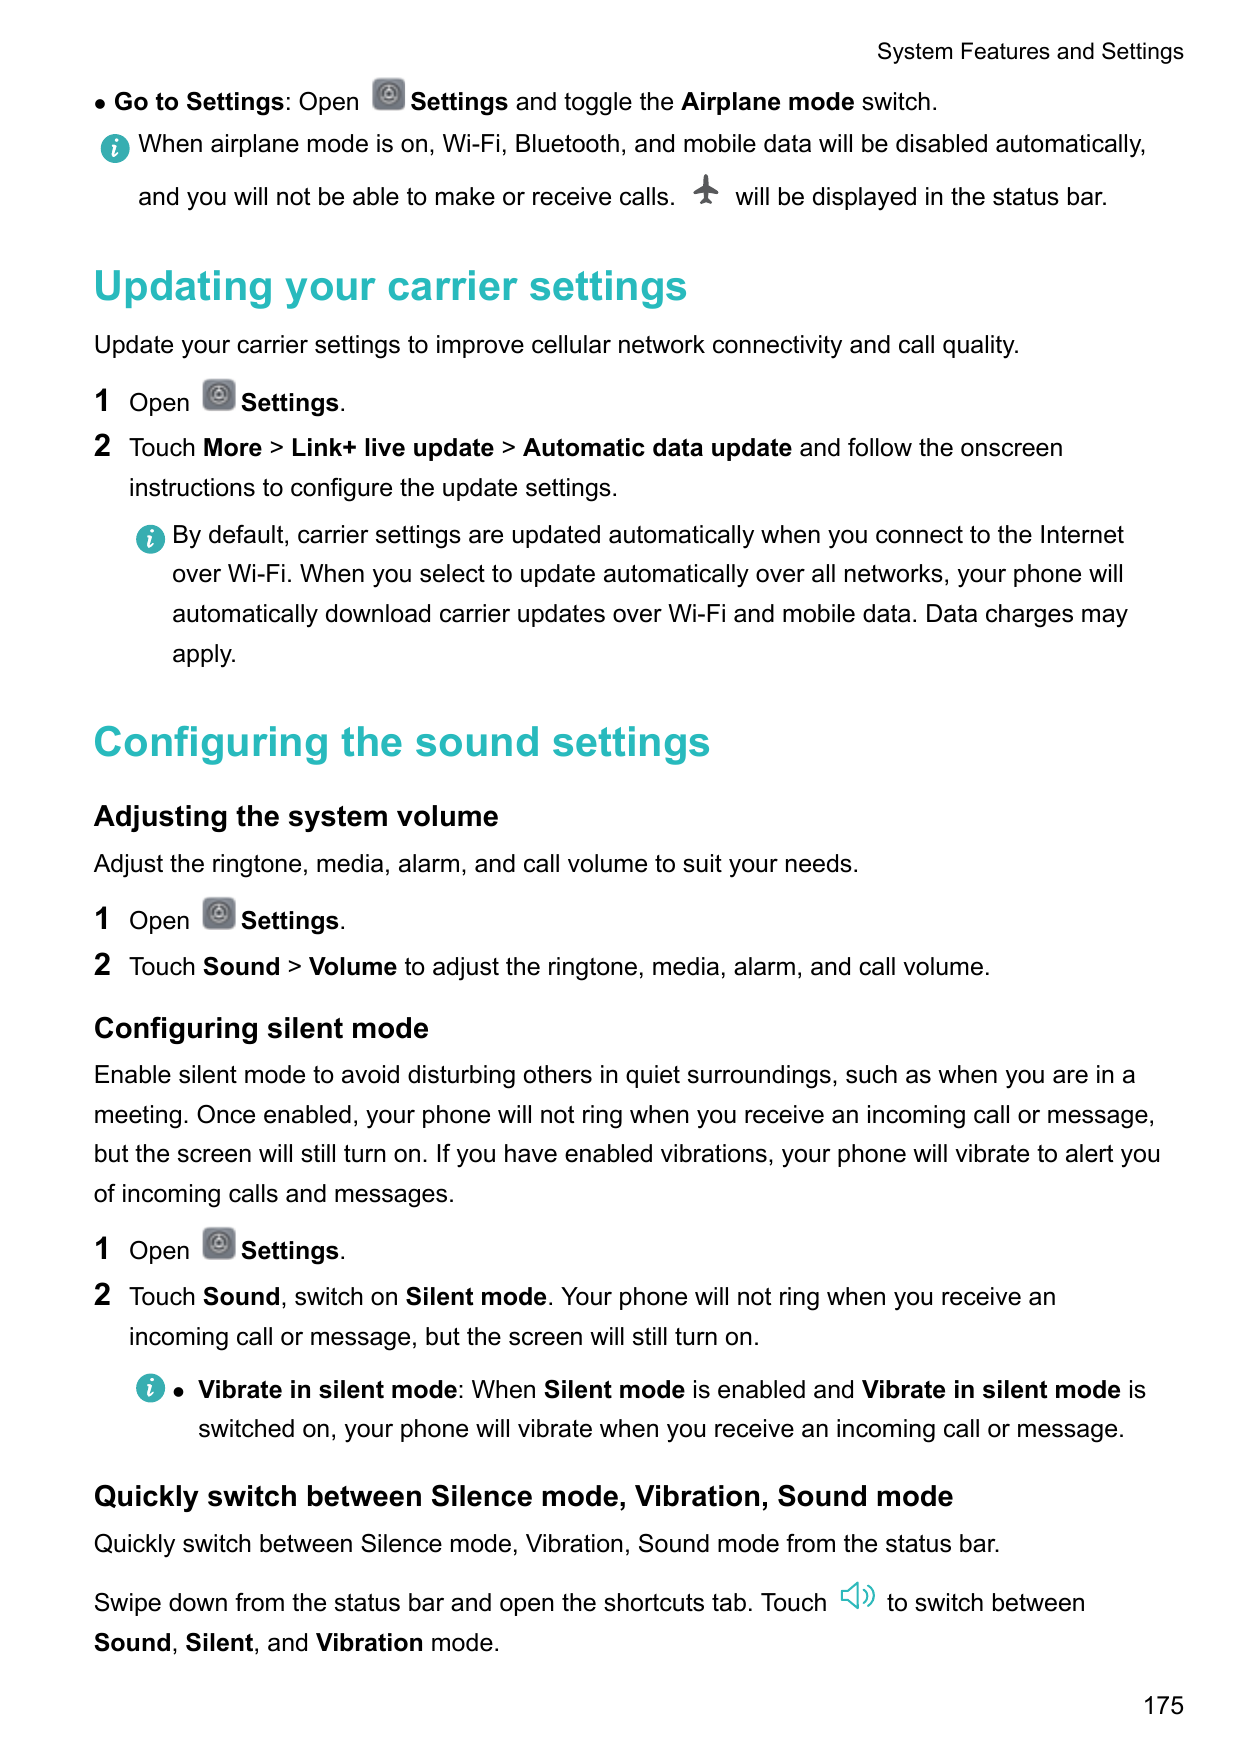 System Features and SettingslGo to Settings: OpenSettings and toggle the Airplane mode switch.When airplane mode is on, Wi-Fi, B